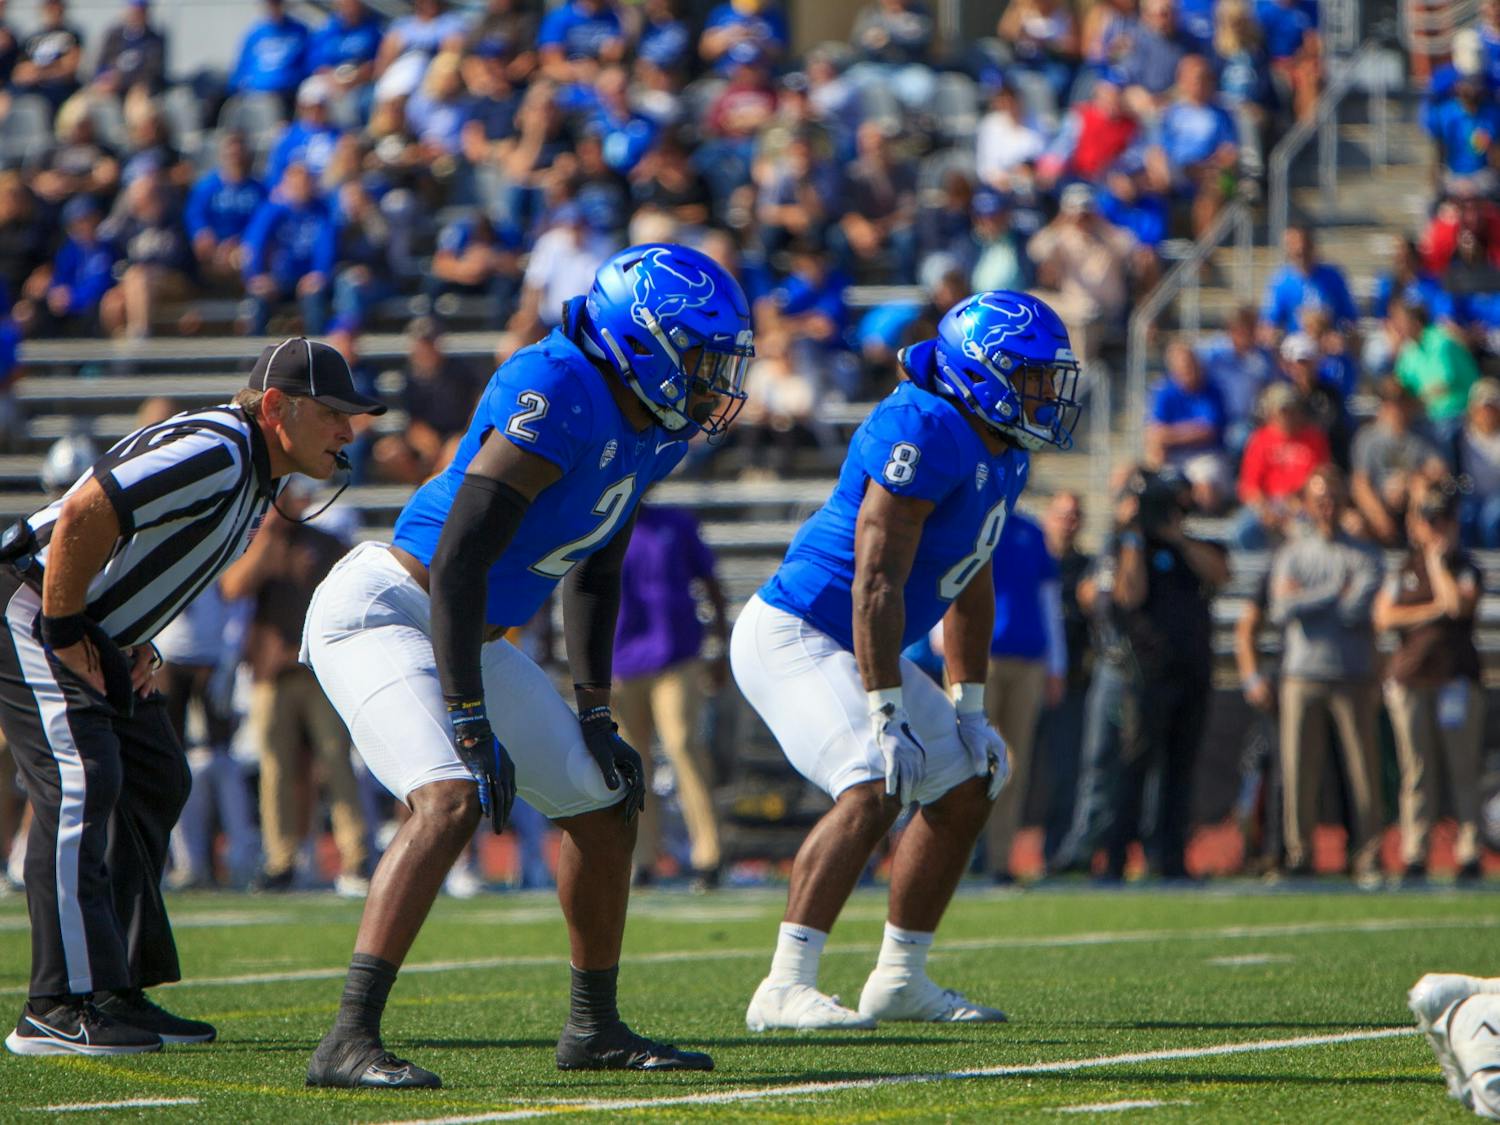 UB linebackers James Patterson (8) and Kadofi Wright (2) currently lead the Bulls in tackles.
